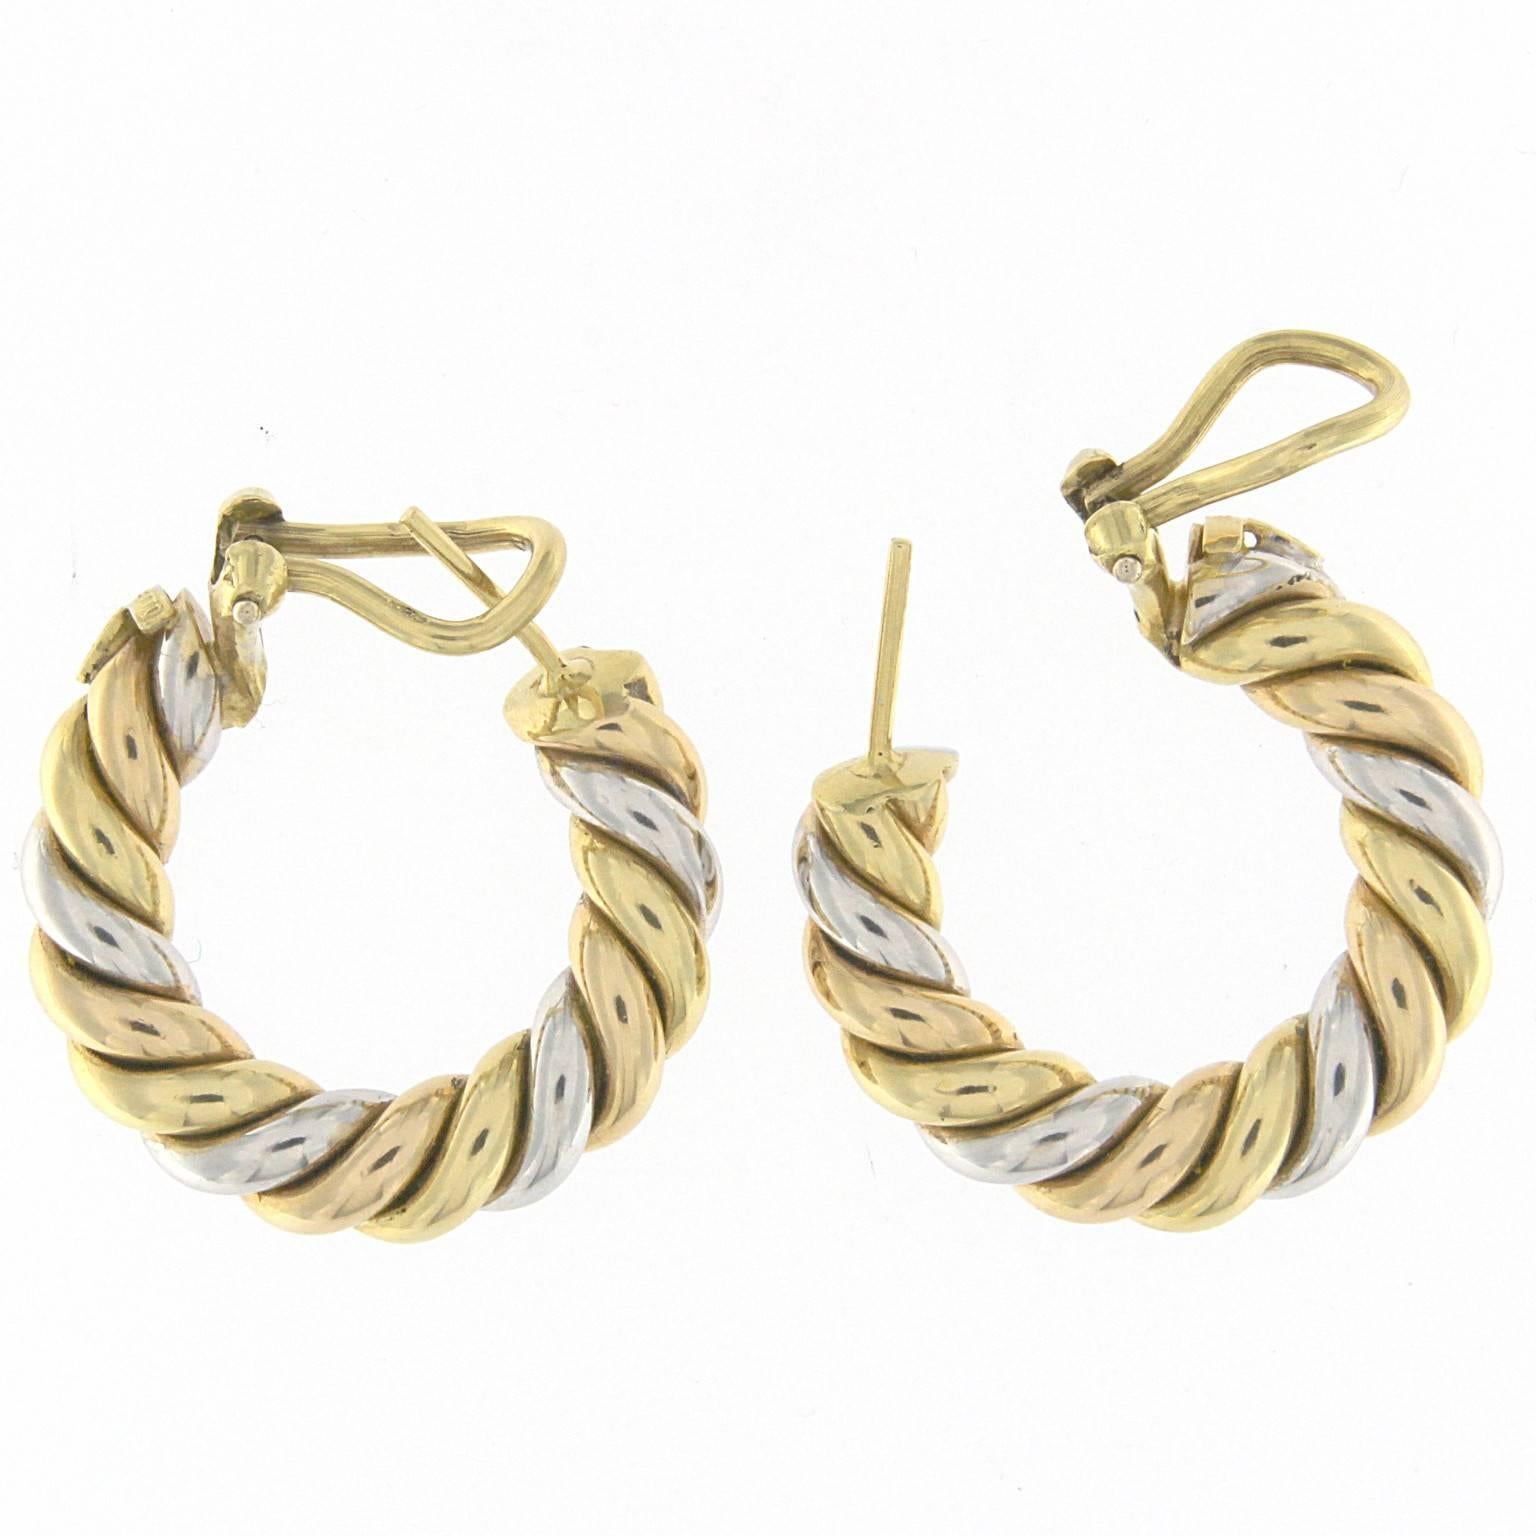 Rope pair of earring in 18 kt  yellow white  rose gold 
This is a traditional collection in Micheletto 

the total weight of the gold is  gr 18.00

STAMP: 10 MI ITALY 750

The full set is available